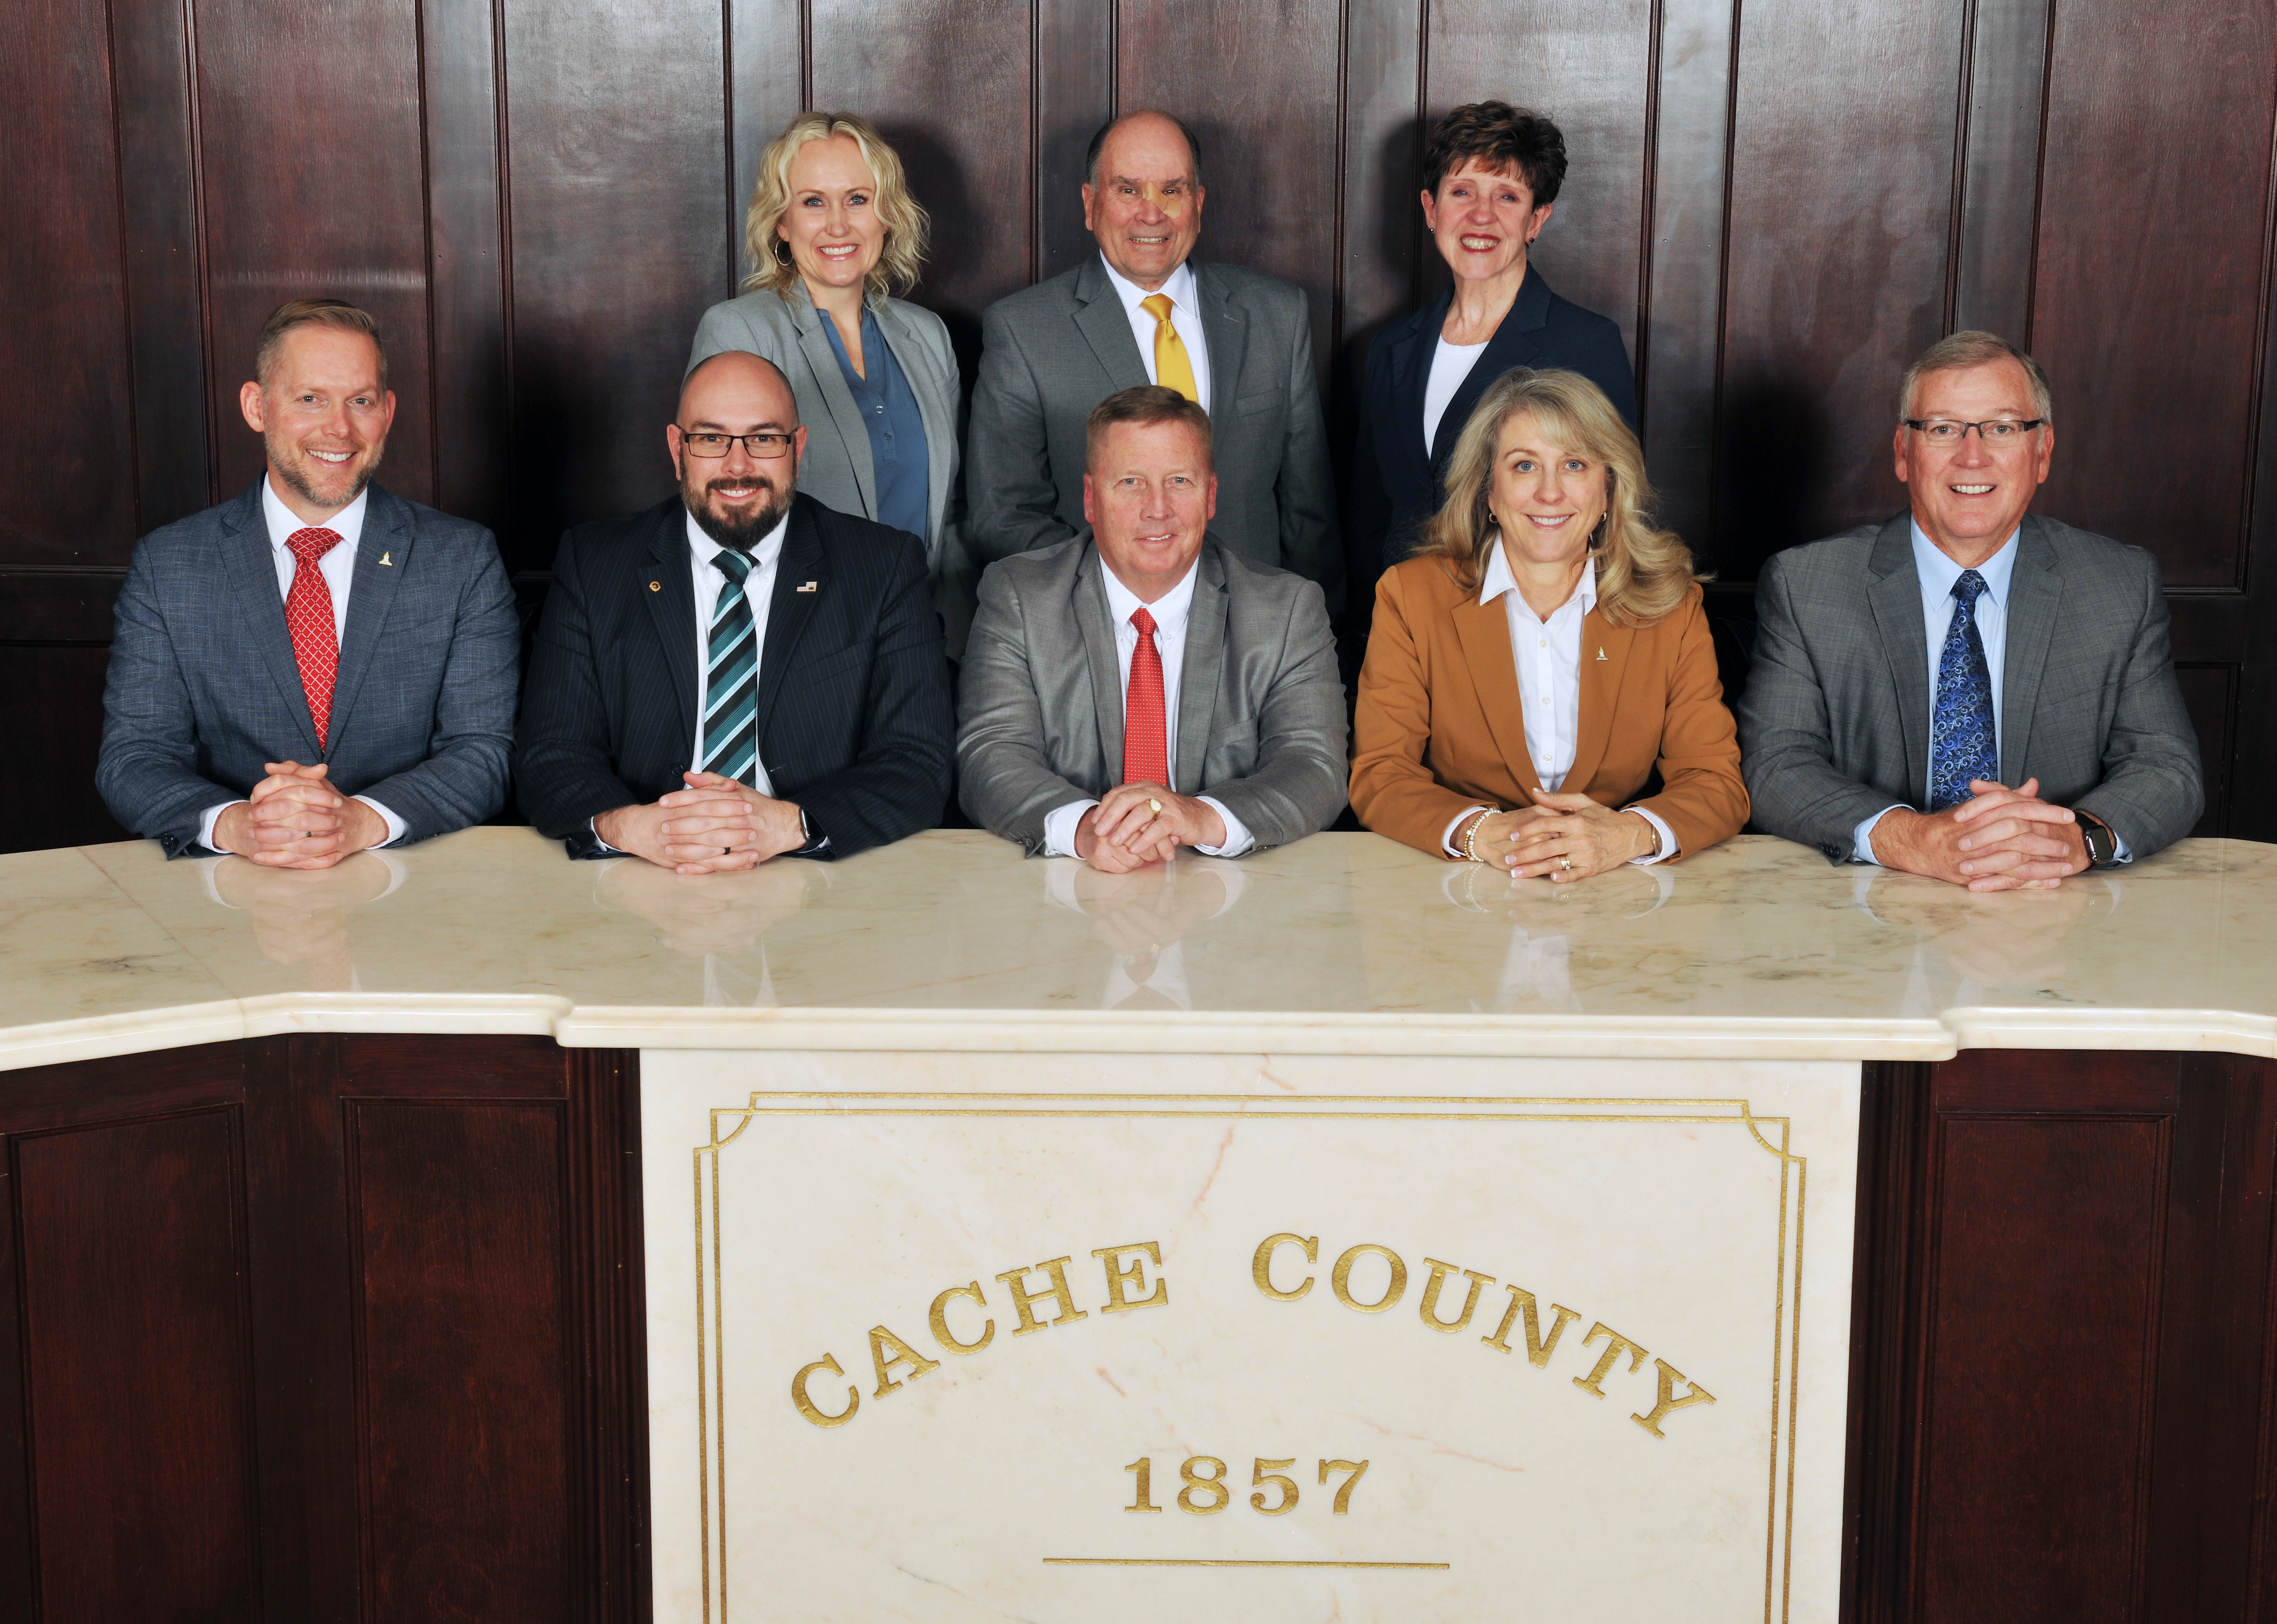 County Council, County Executive, County Clerk/Auditor